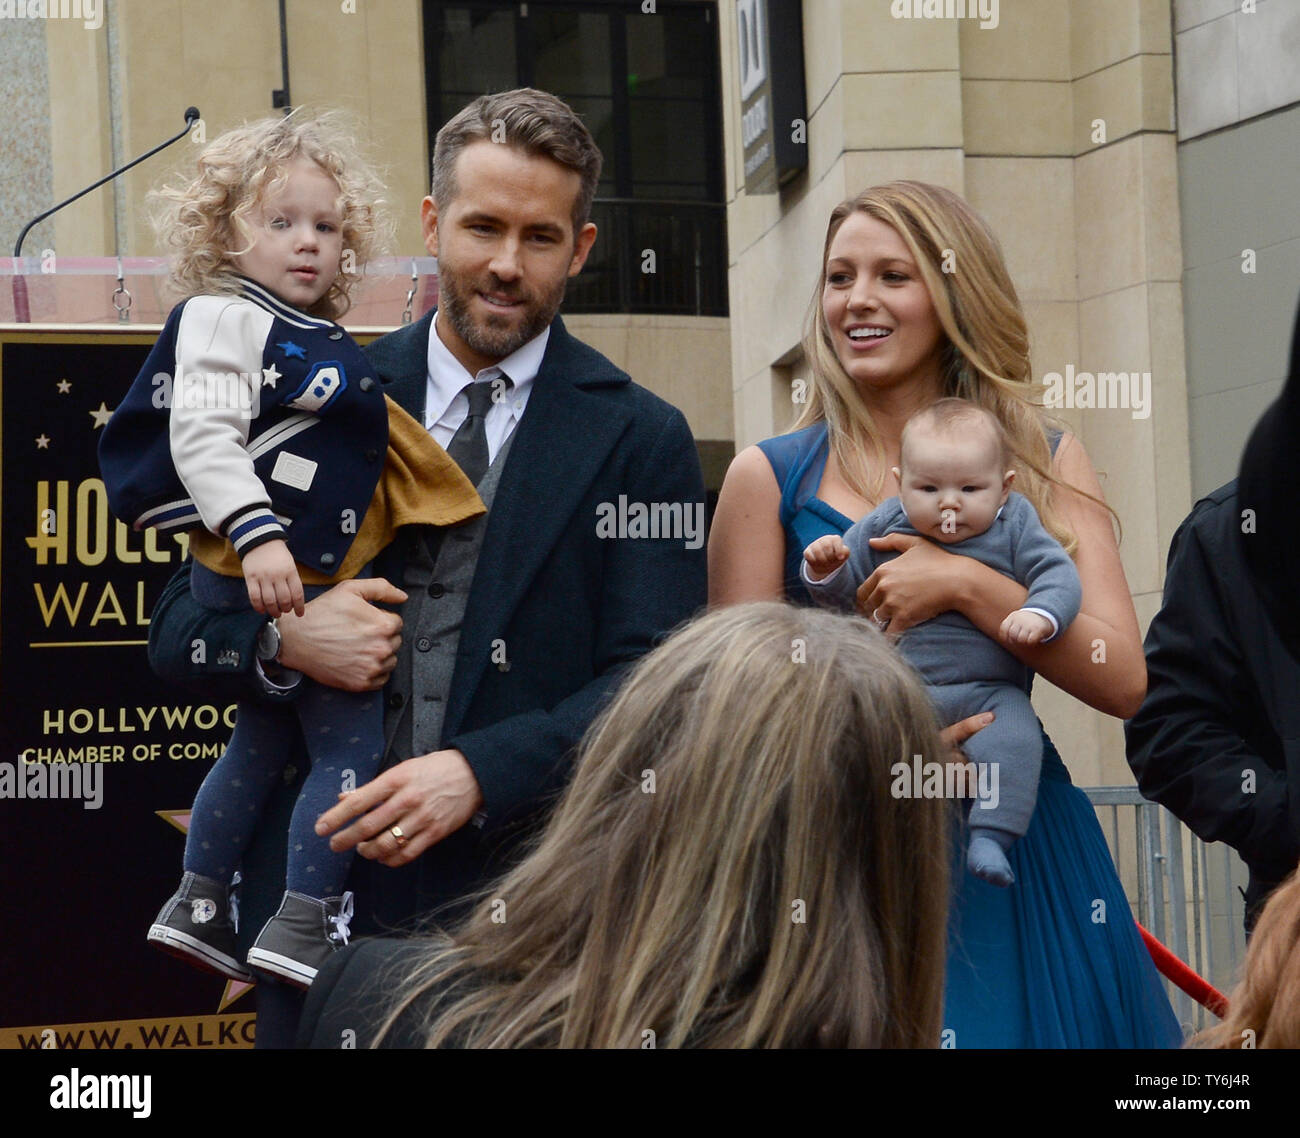 Ryan Reynolds and Blake Lively pose for photos with their newborn